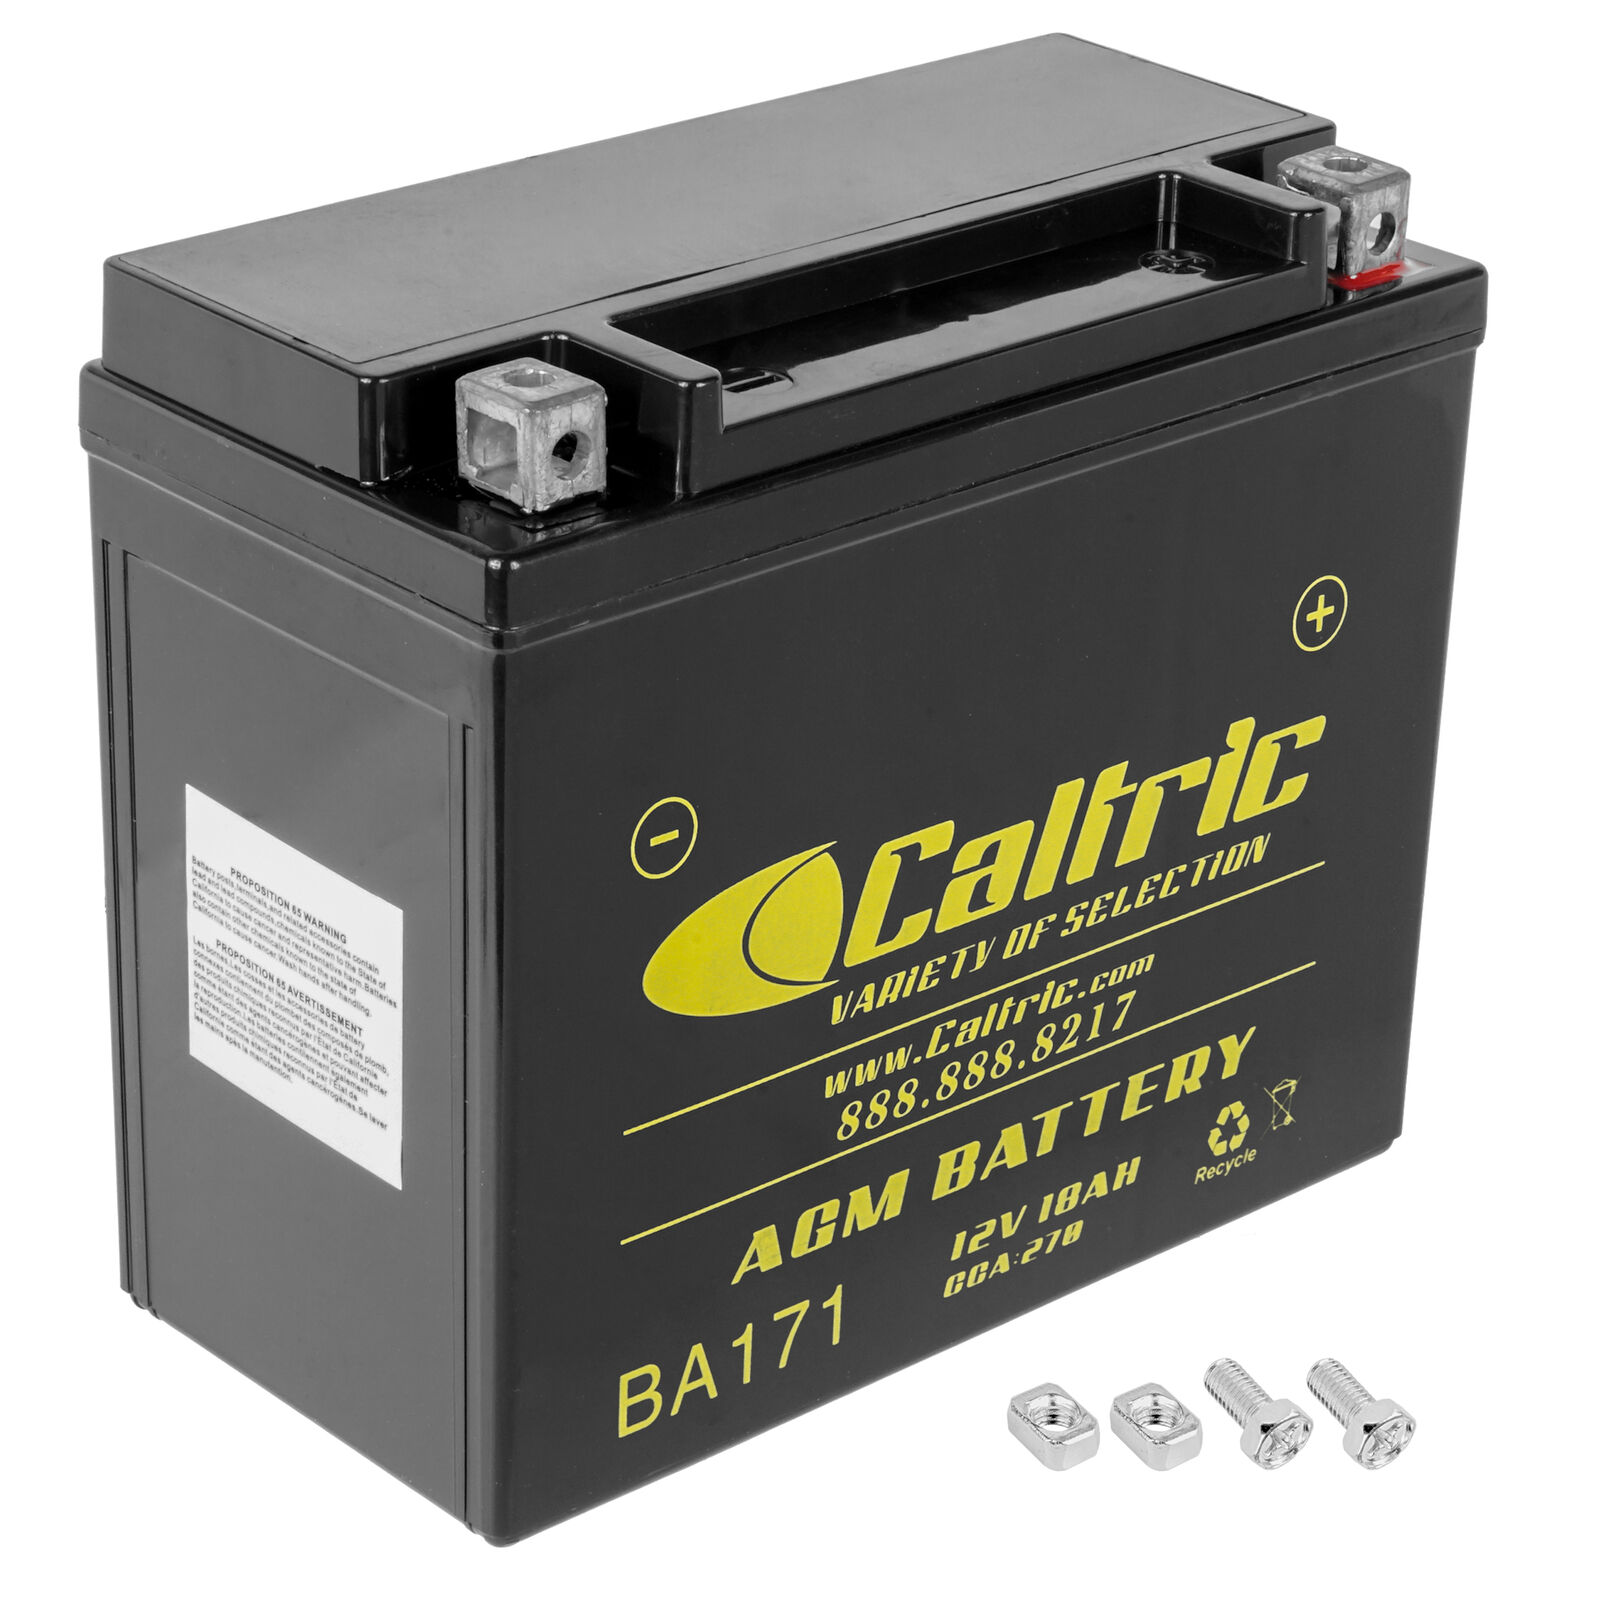 Ytx20L-Bs AGM Battery For Harley Davidson 65989-97 65989-97A 65989-97B 65989-97C